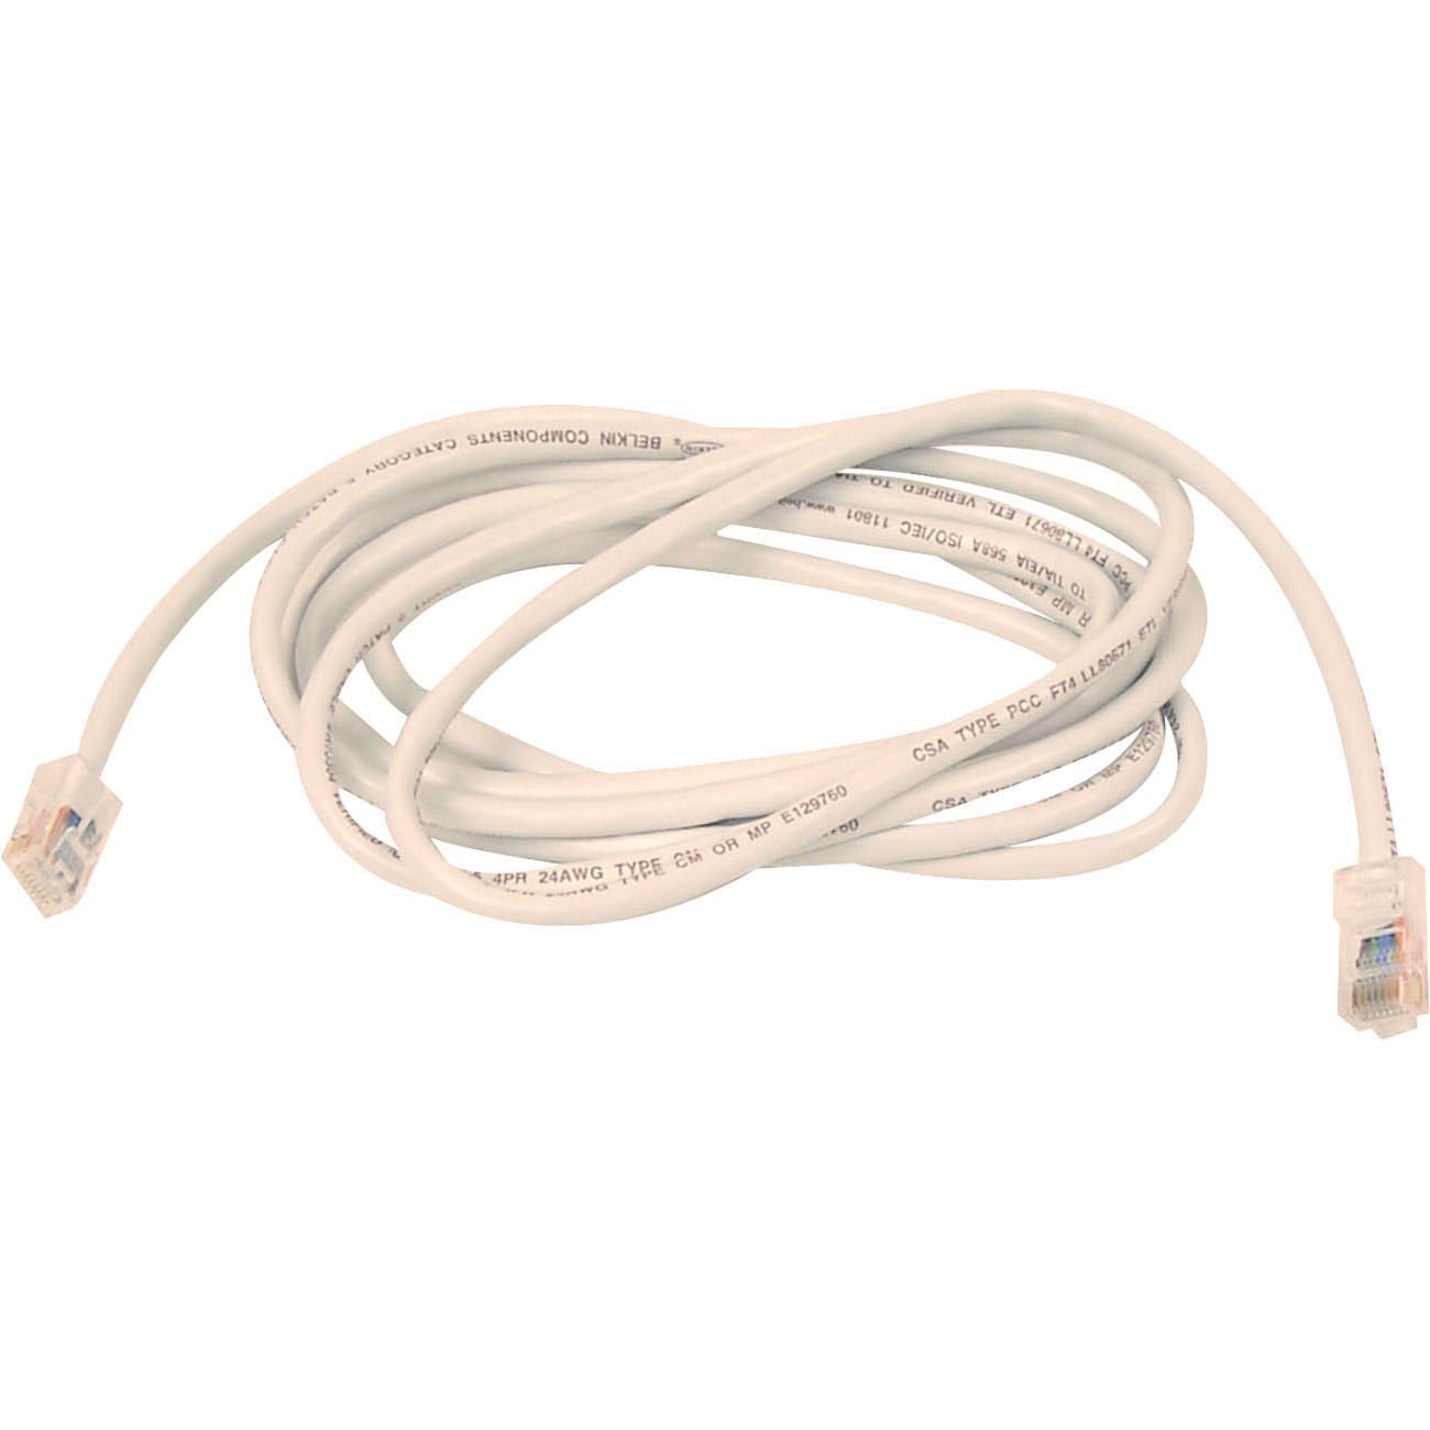 Belkin A3L791-50-WHT Cat5e Patch Cable, 50 ft, PowerSum Tested, EIA/TIA-568 Certified